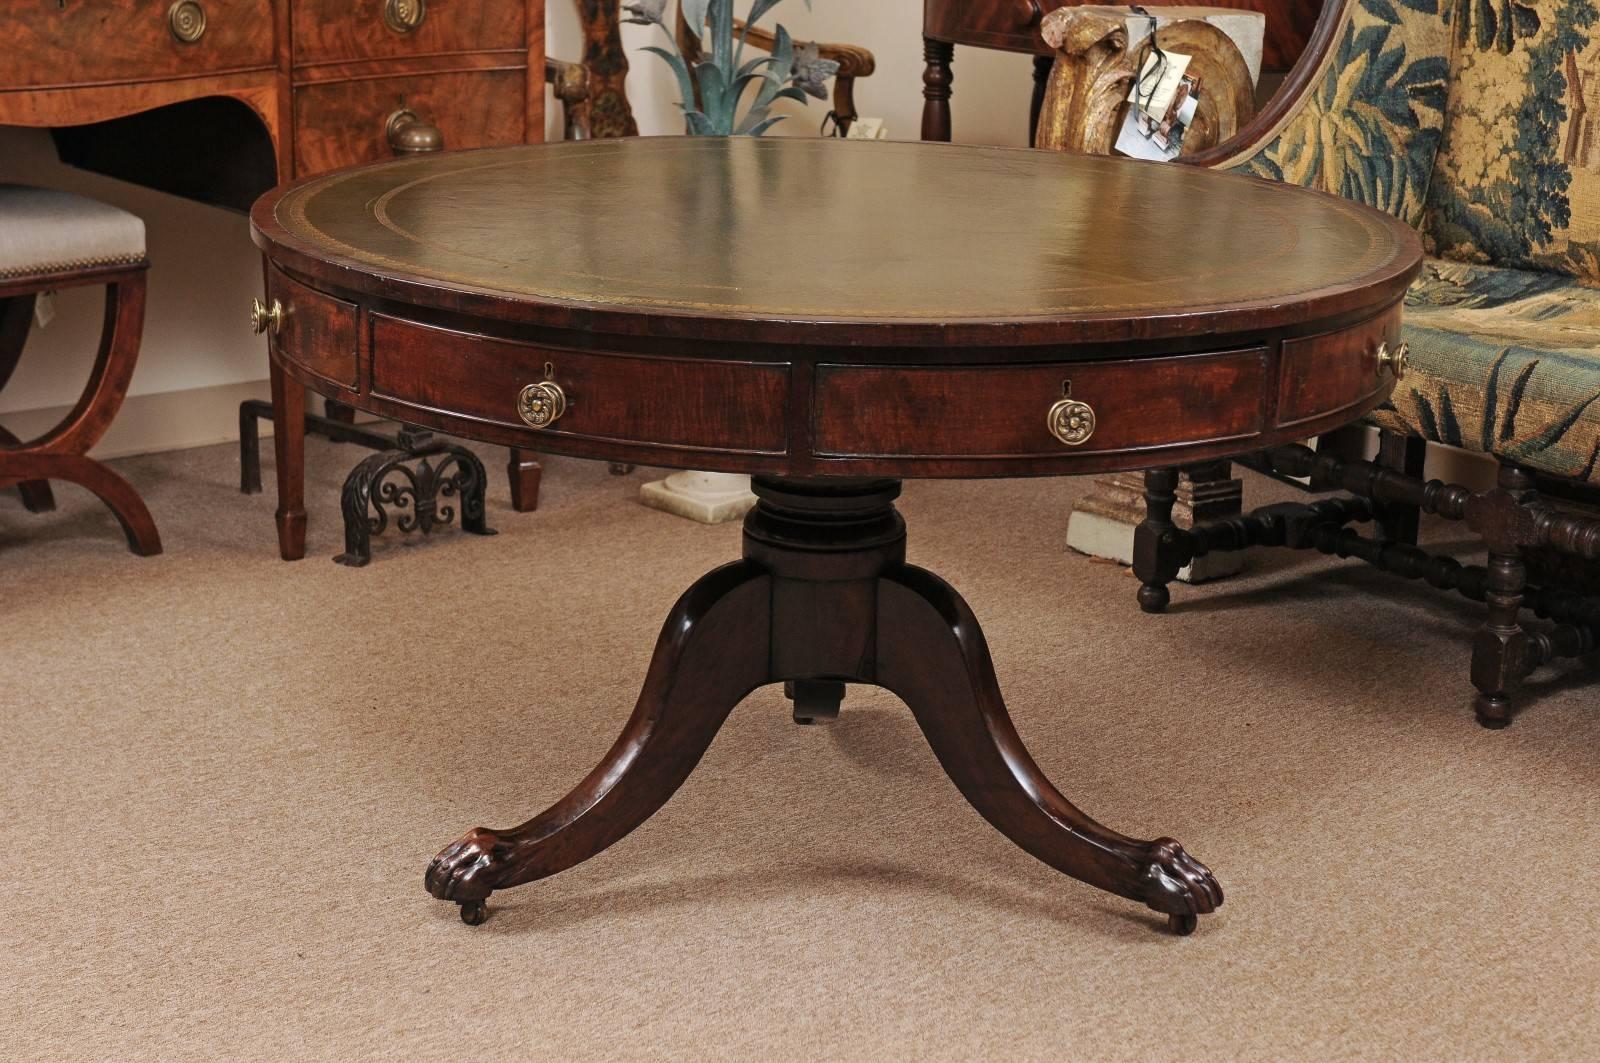 Rotating mahogany rent / library table with pedestal base featuring paw feet and embossed green leather top, dates from 19th century, England.